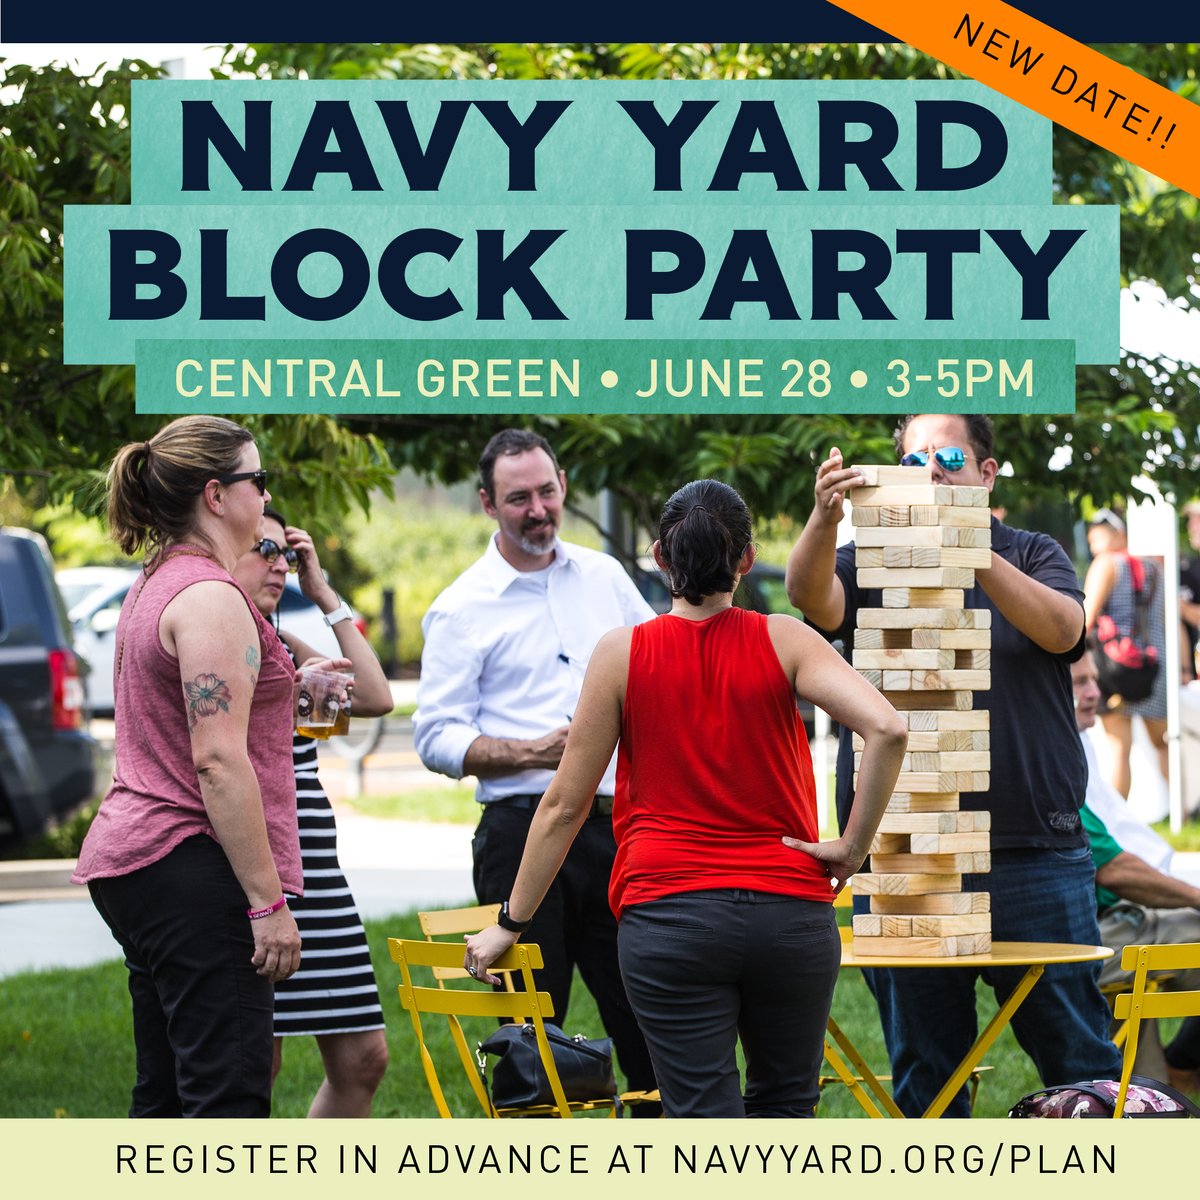 The fun never stops! The Navy Yard Block Party is in a few weeks! Come celebrate the Navy Yard, our community, and our future on June 28 at Central Green! Includes food trucks, live music, and activities. Free to attend; must register in advance. bit.ly/3HqG9Vf